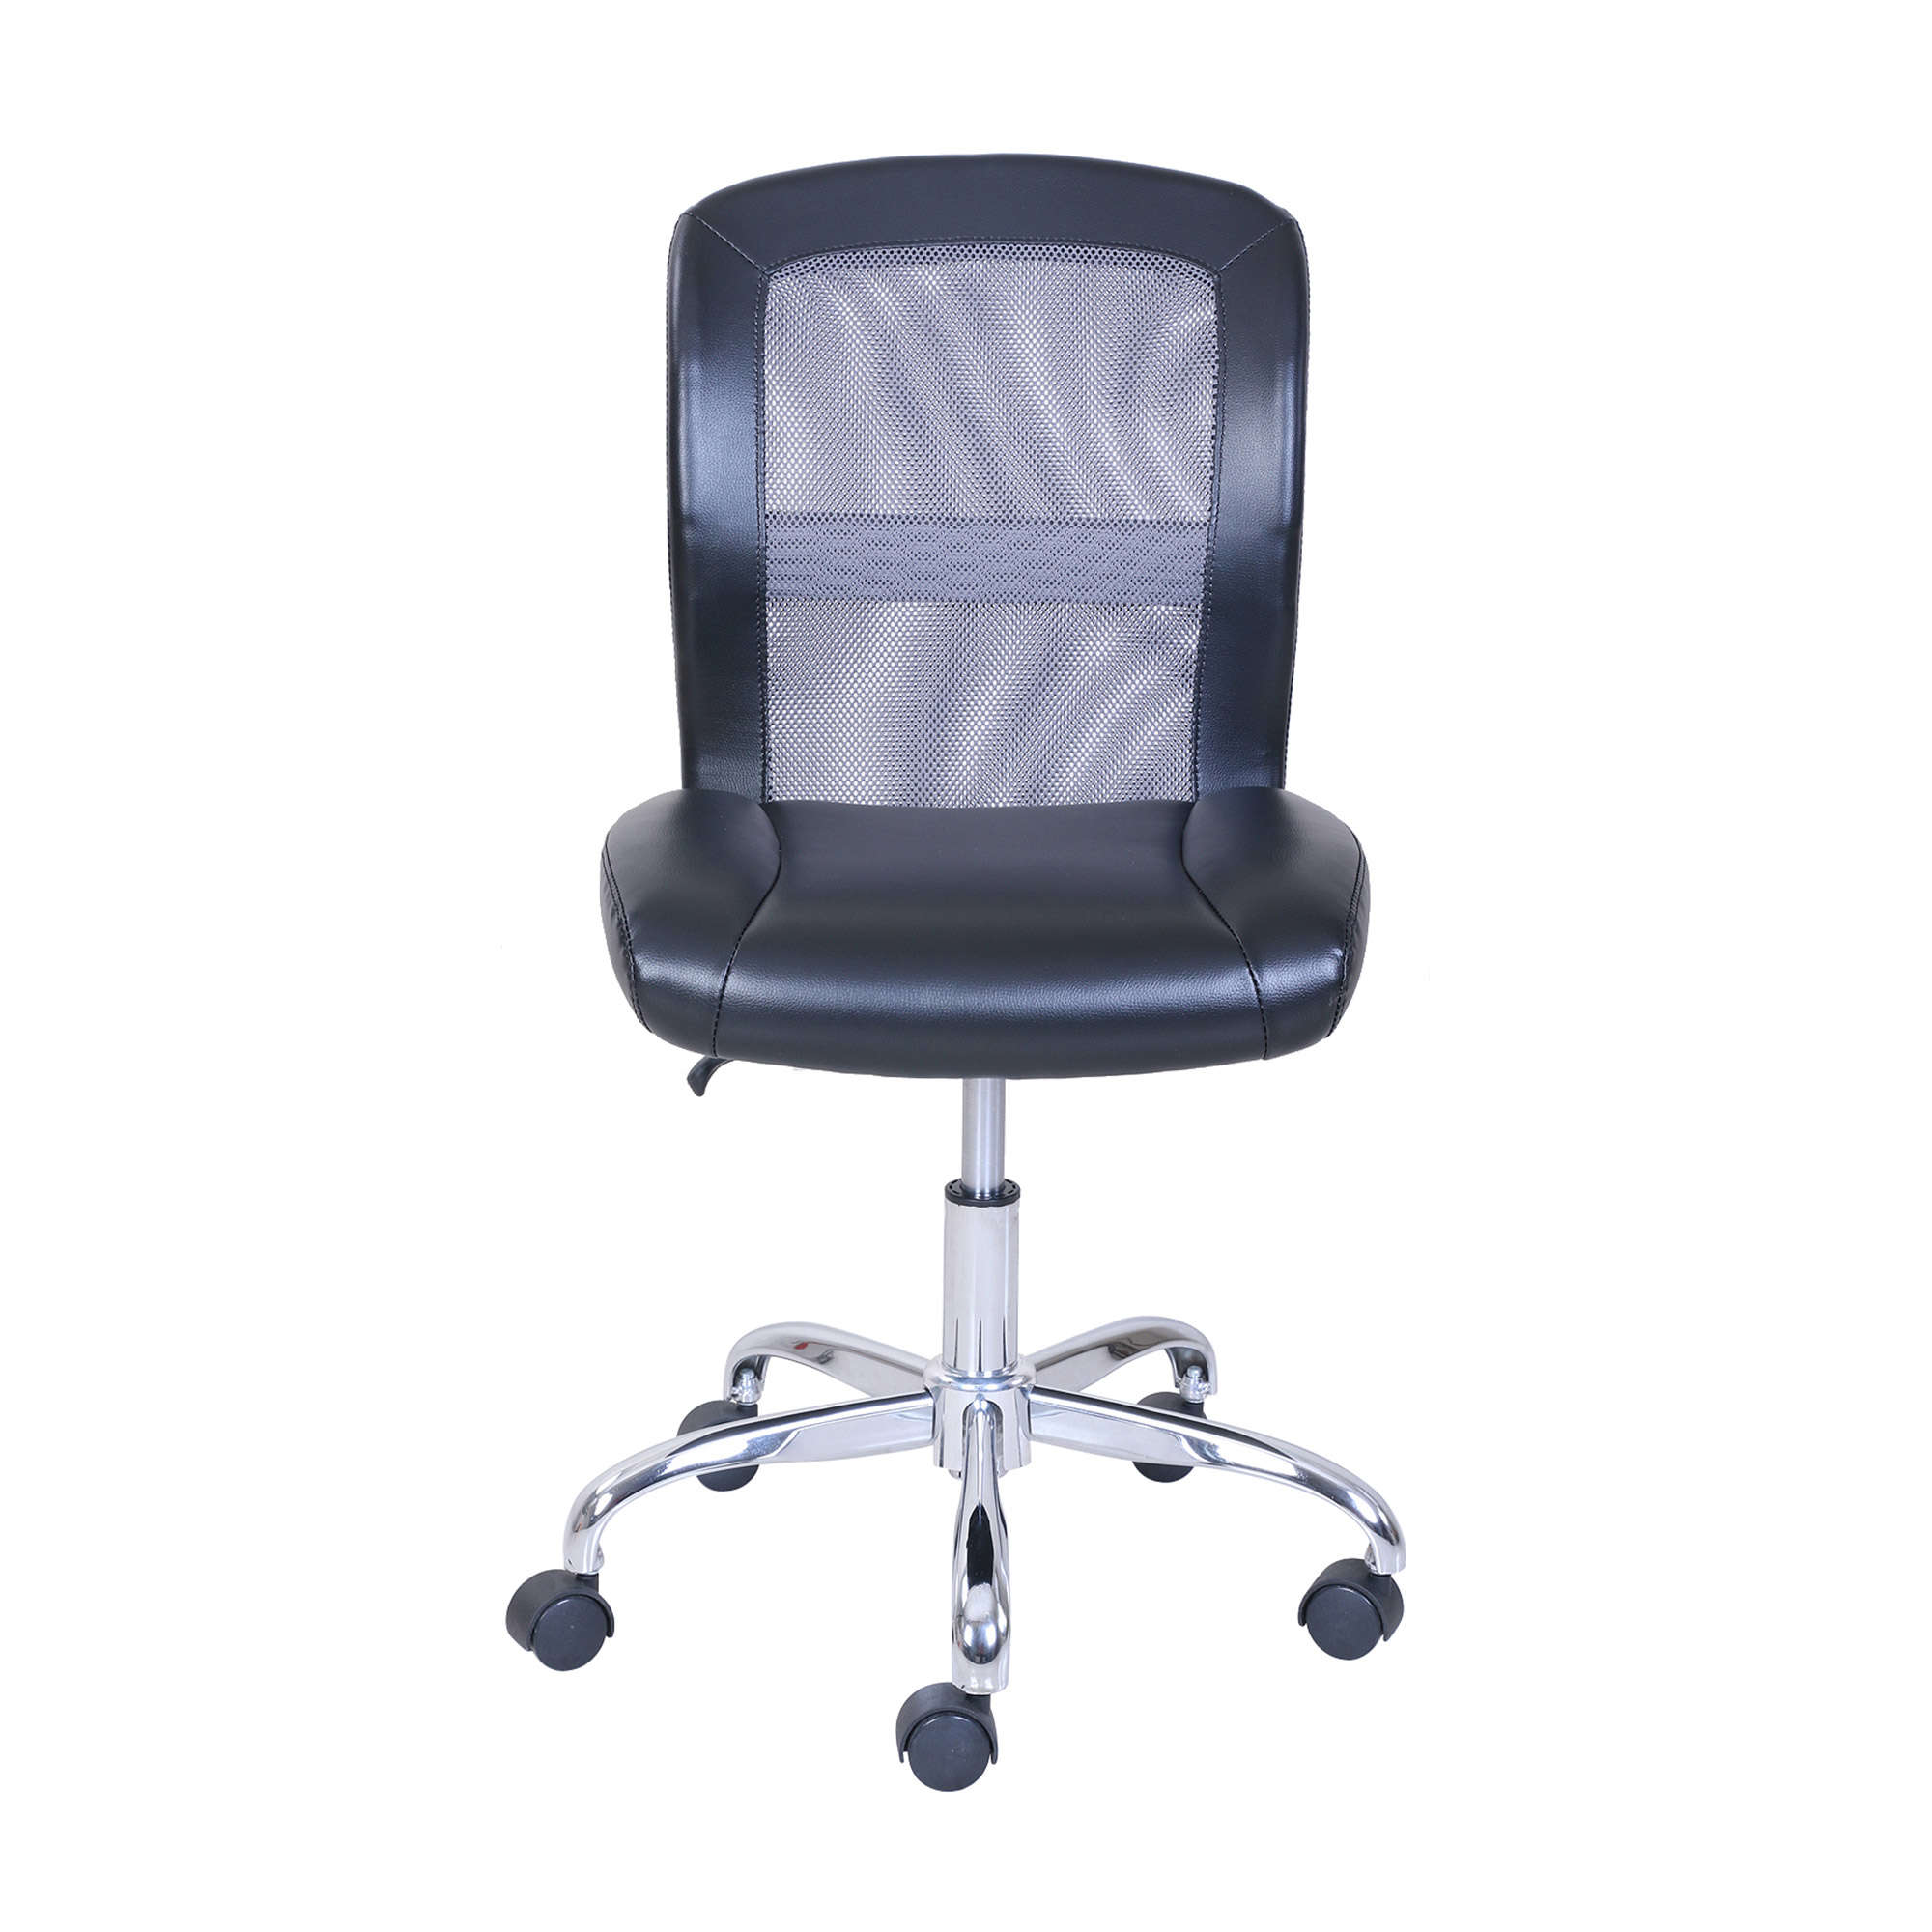 Mainstays Mid-Back, Vinyl Mesh Task Office Chair, Black and Gray - image 2 of 5